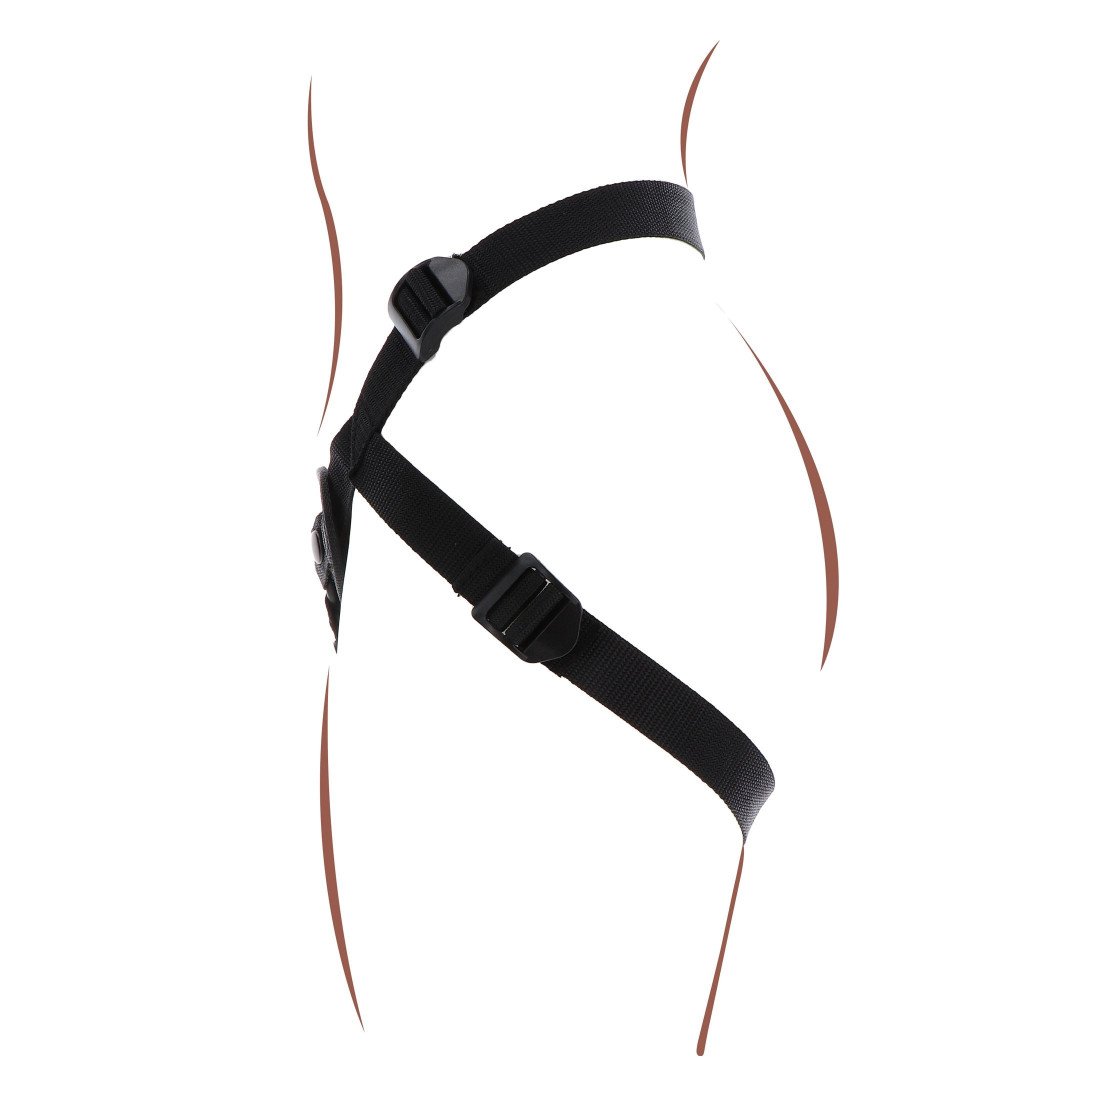 Diržai strap-on seksui „Strap-on Harness“ - Get Real